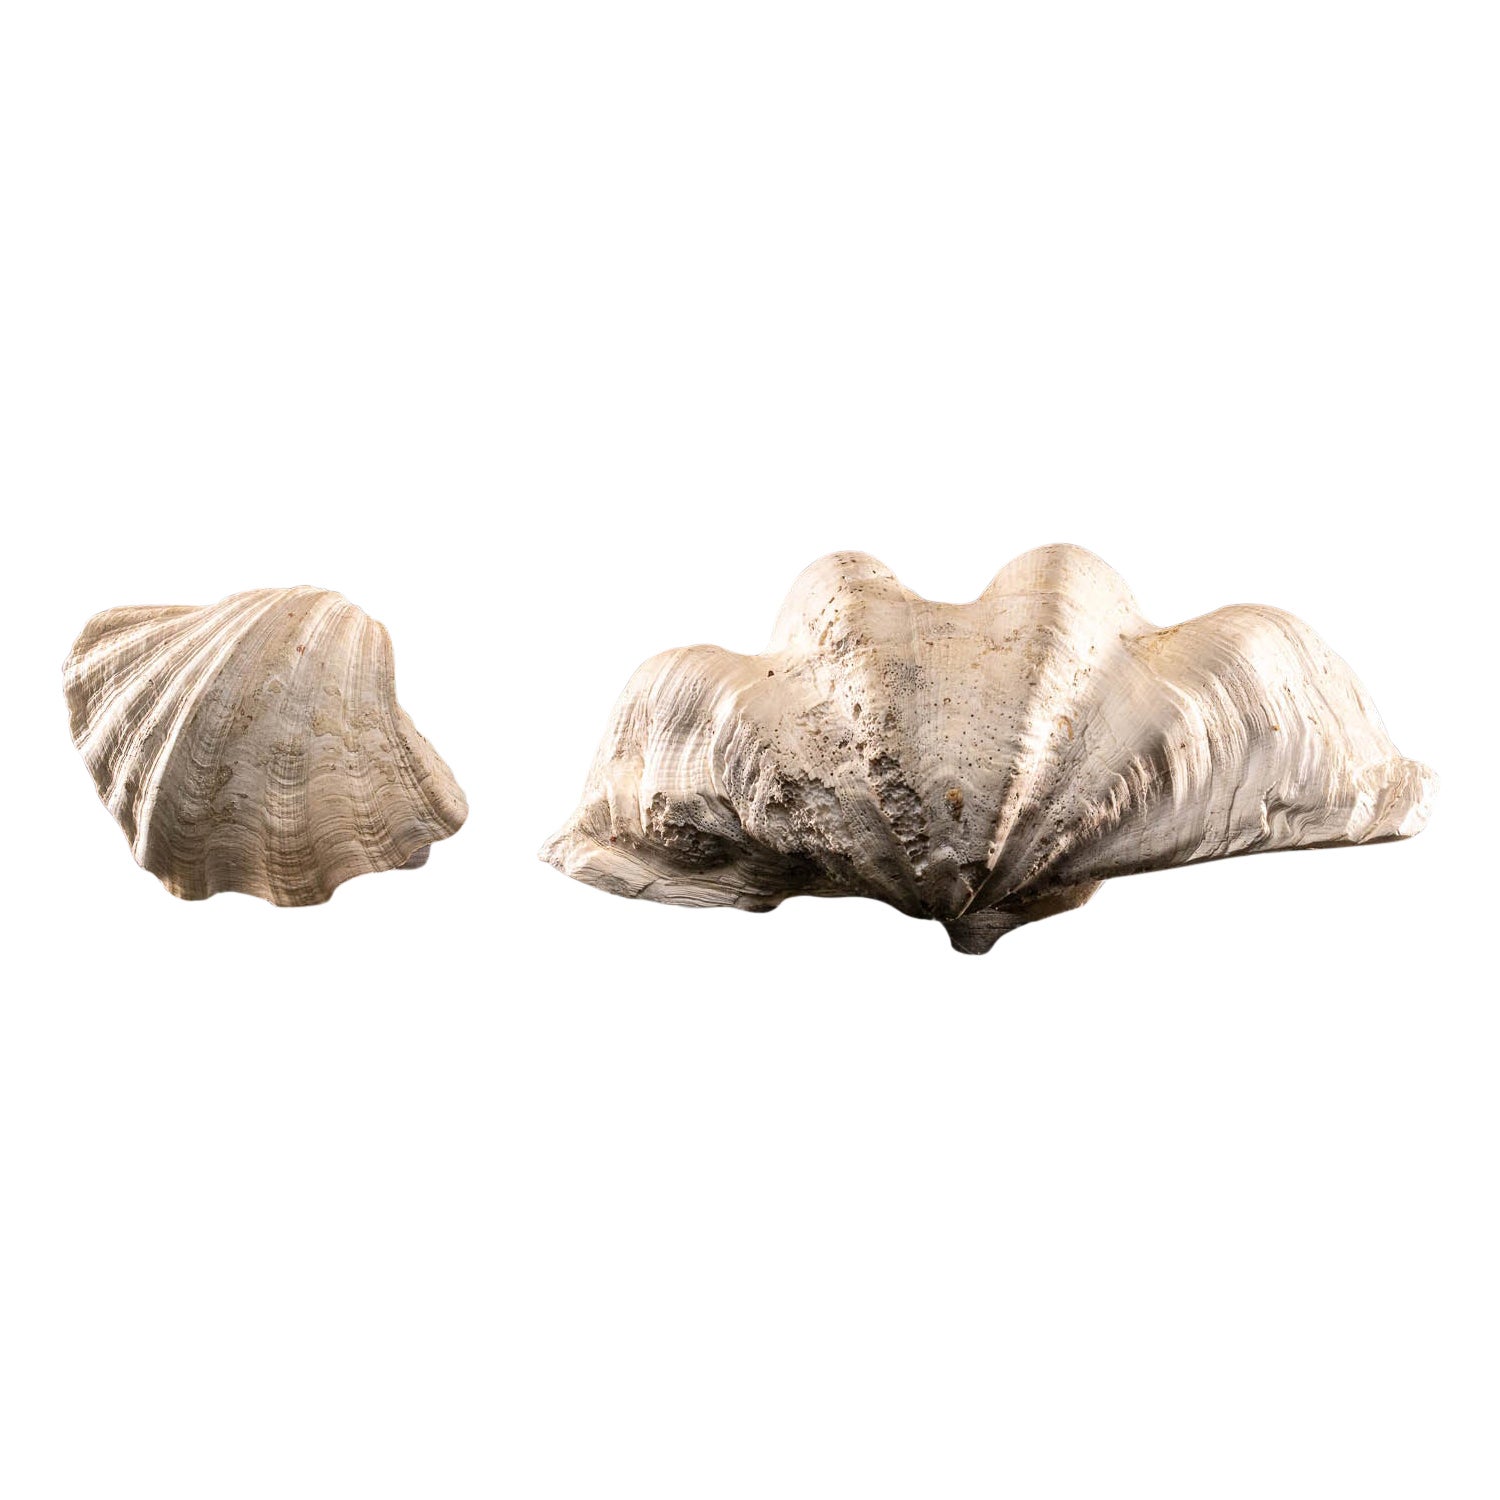  Selection  of 2 Polished Tridacna or Giant Clam  For Sale